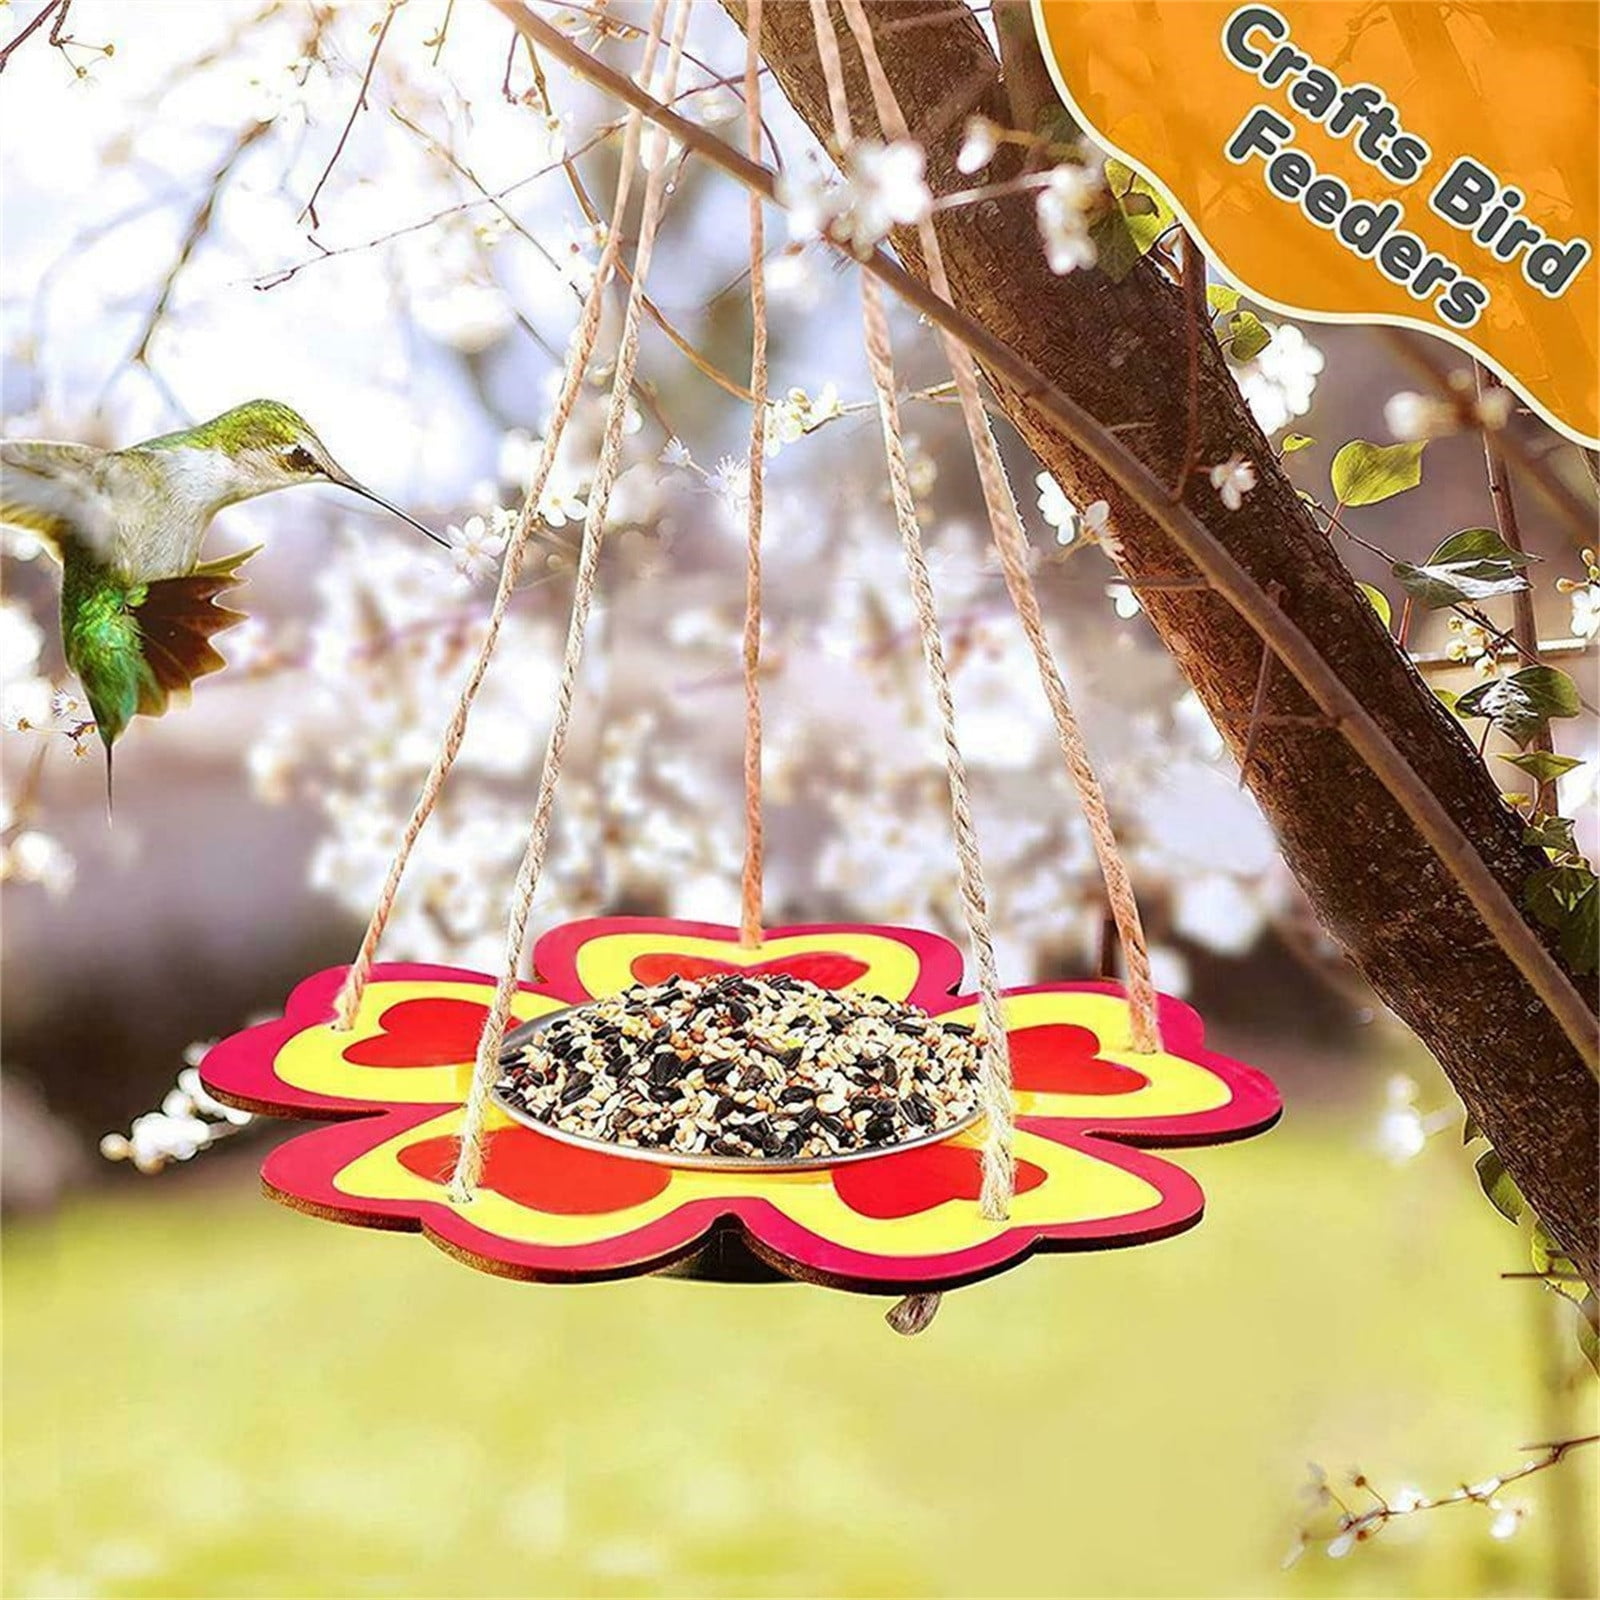 Upgraded Bird Feeders Kids Arts and Crafts Kits for Outdoor, 2-Pack STEM  Painting Art Activities Crafts Gifts Outside Toys for Boys Girls Age 8-12  4-6 6-8 3-5 - Coupon Codes, Promo Codes